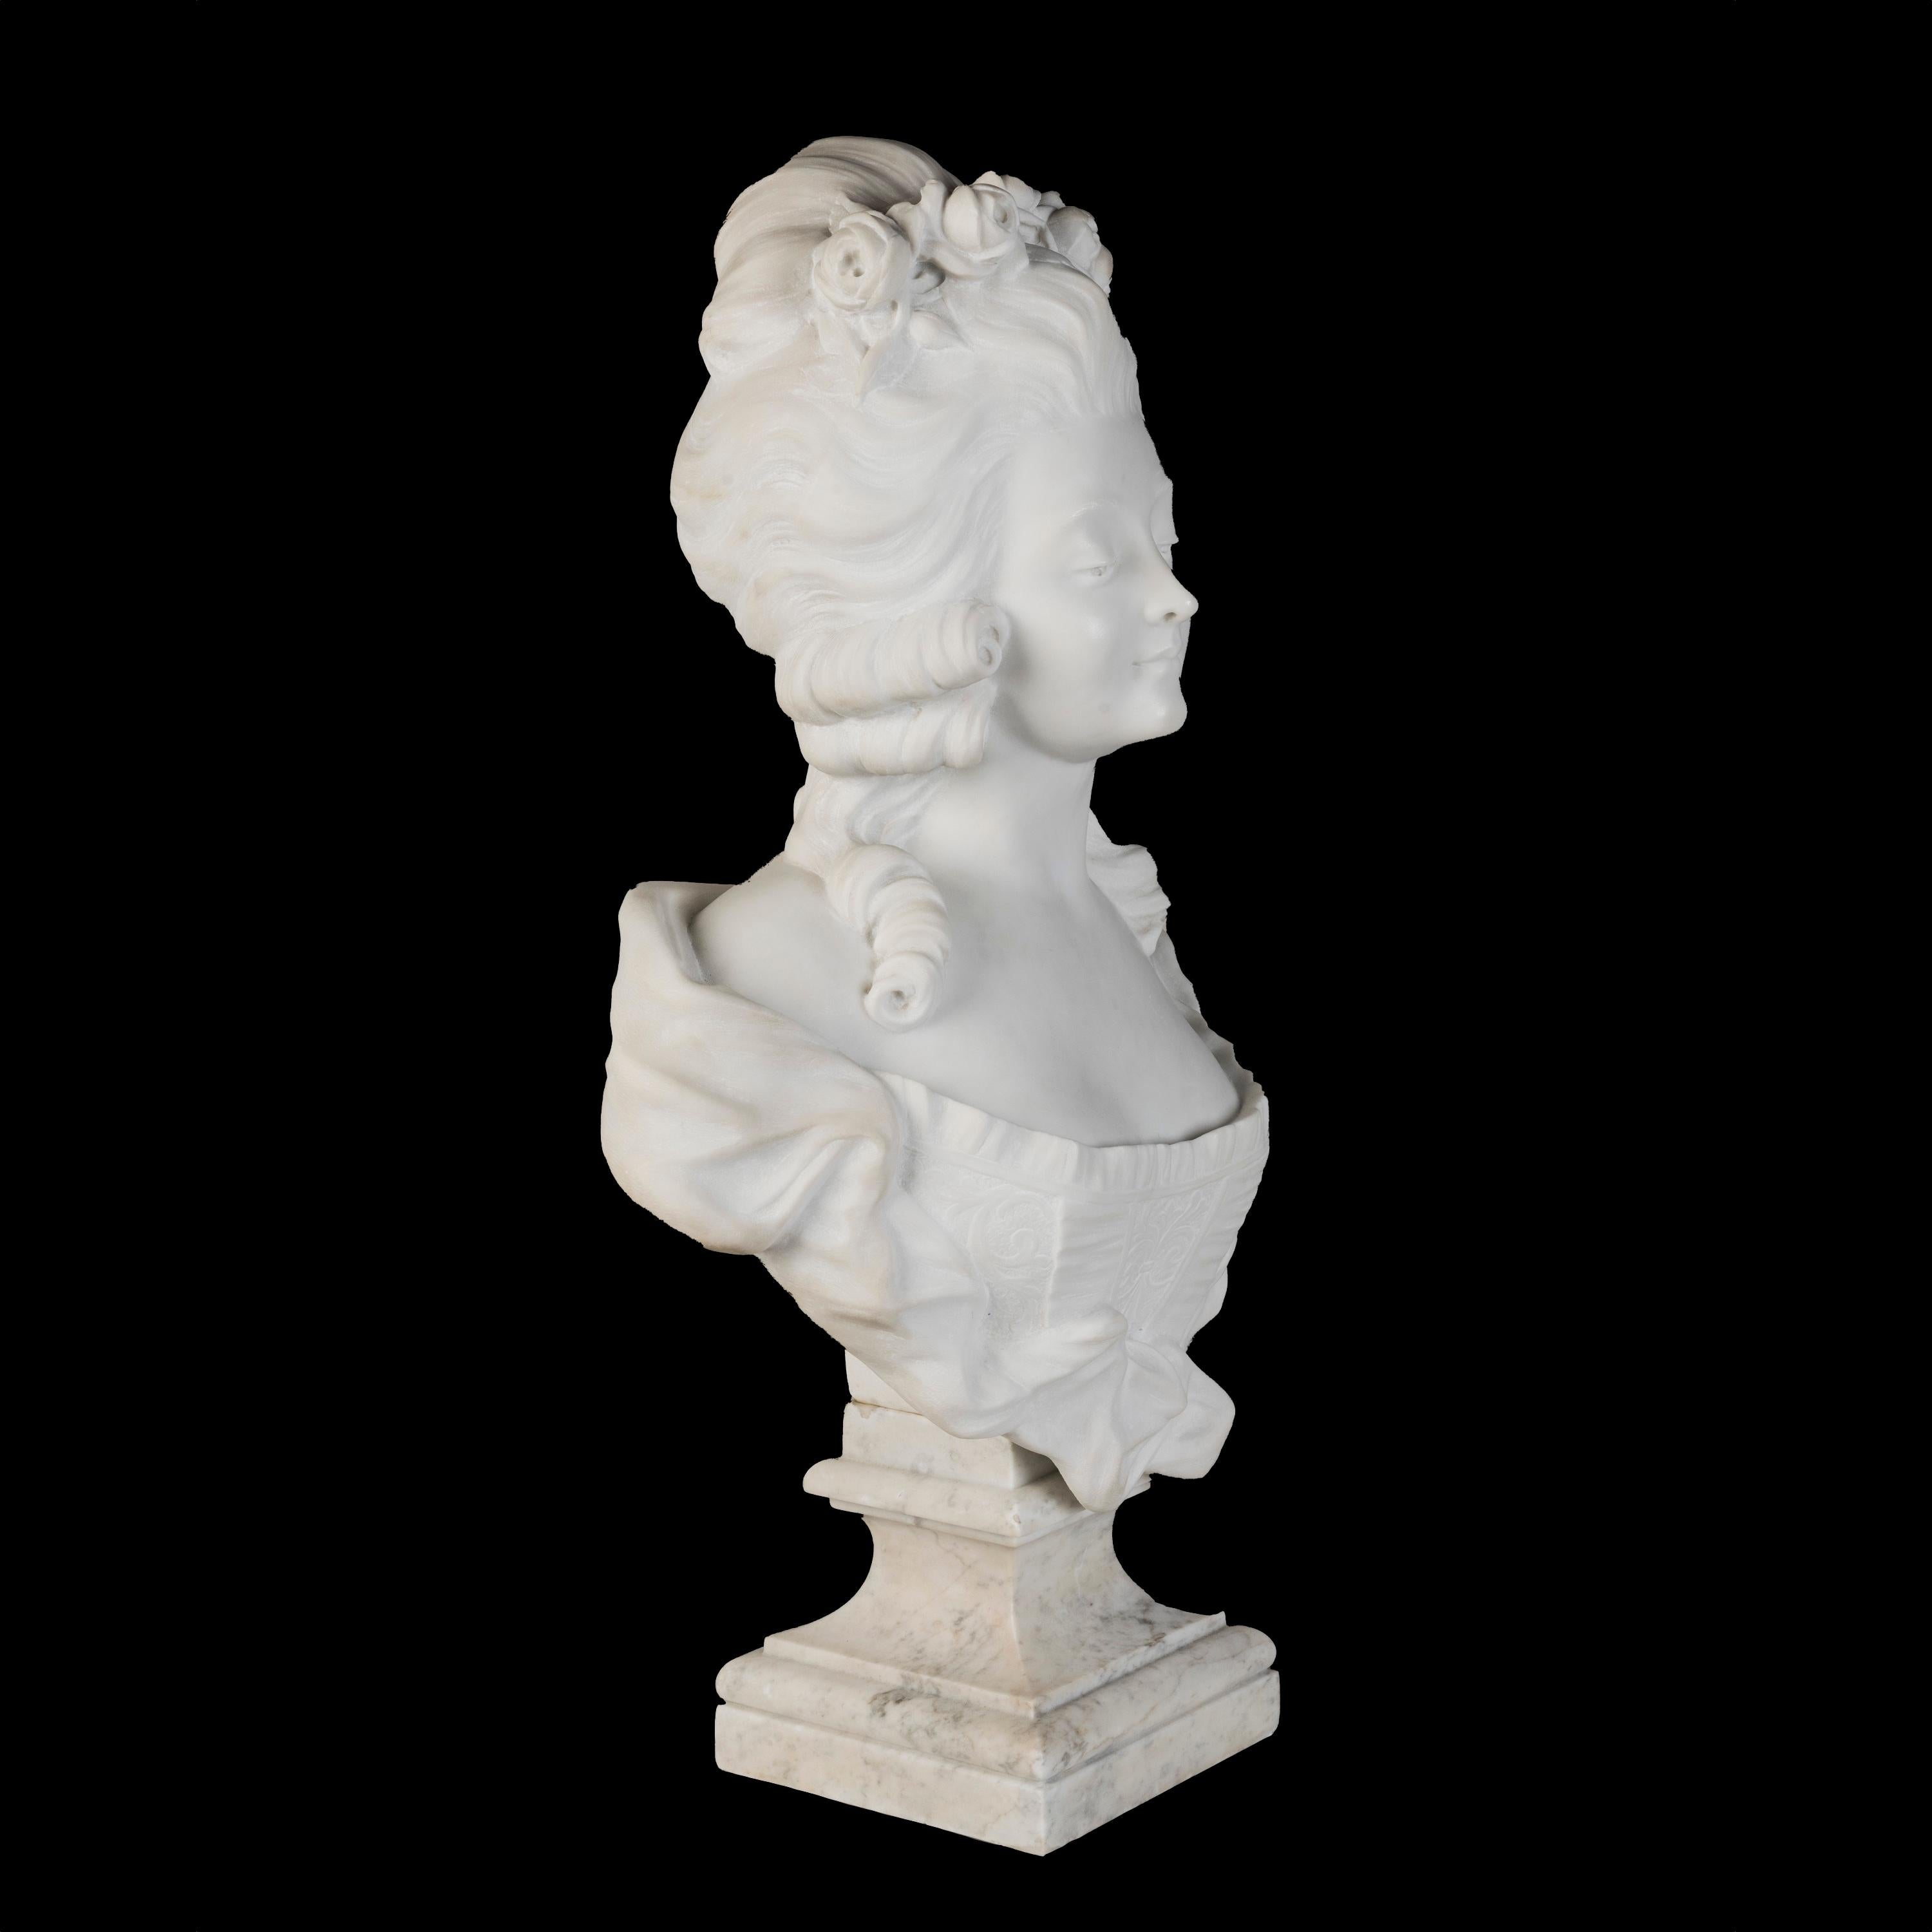 Bust of the Princess of Lamballe
Marie Antoinette's Closest Confidante

Carved from statuary marble and resting on a waisted rectangular Carrara socle, the portrait bust of Princess Marie-Louise Thérèse of Savoy-Carignan, later known as Princesse